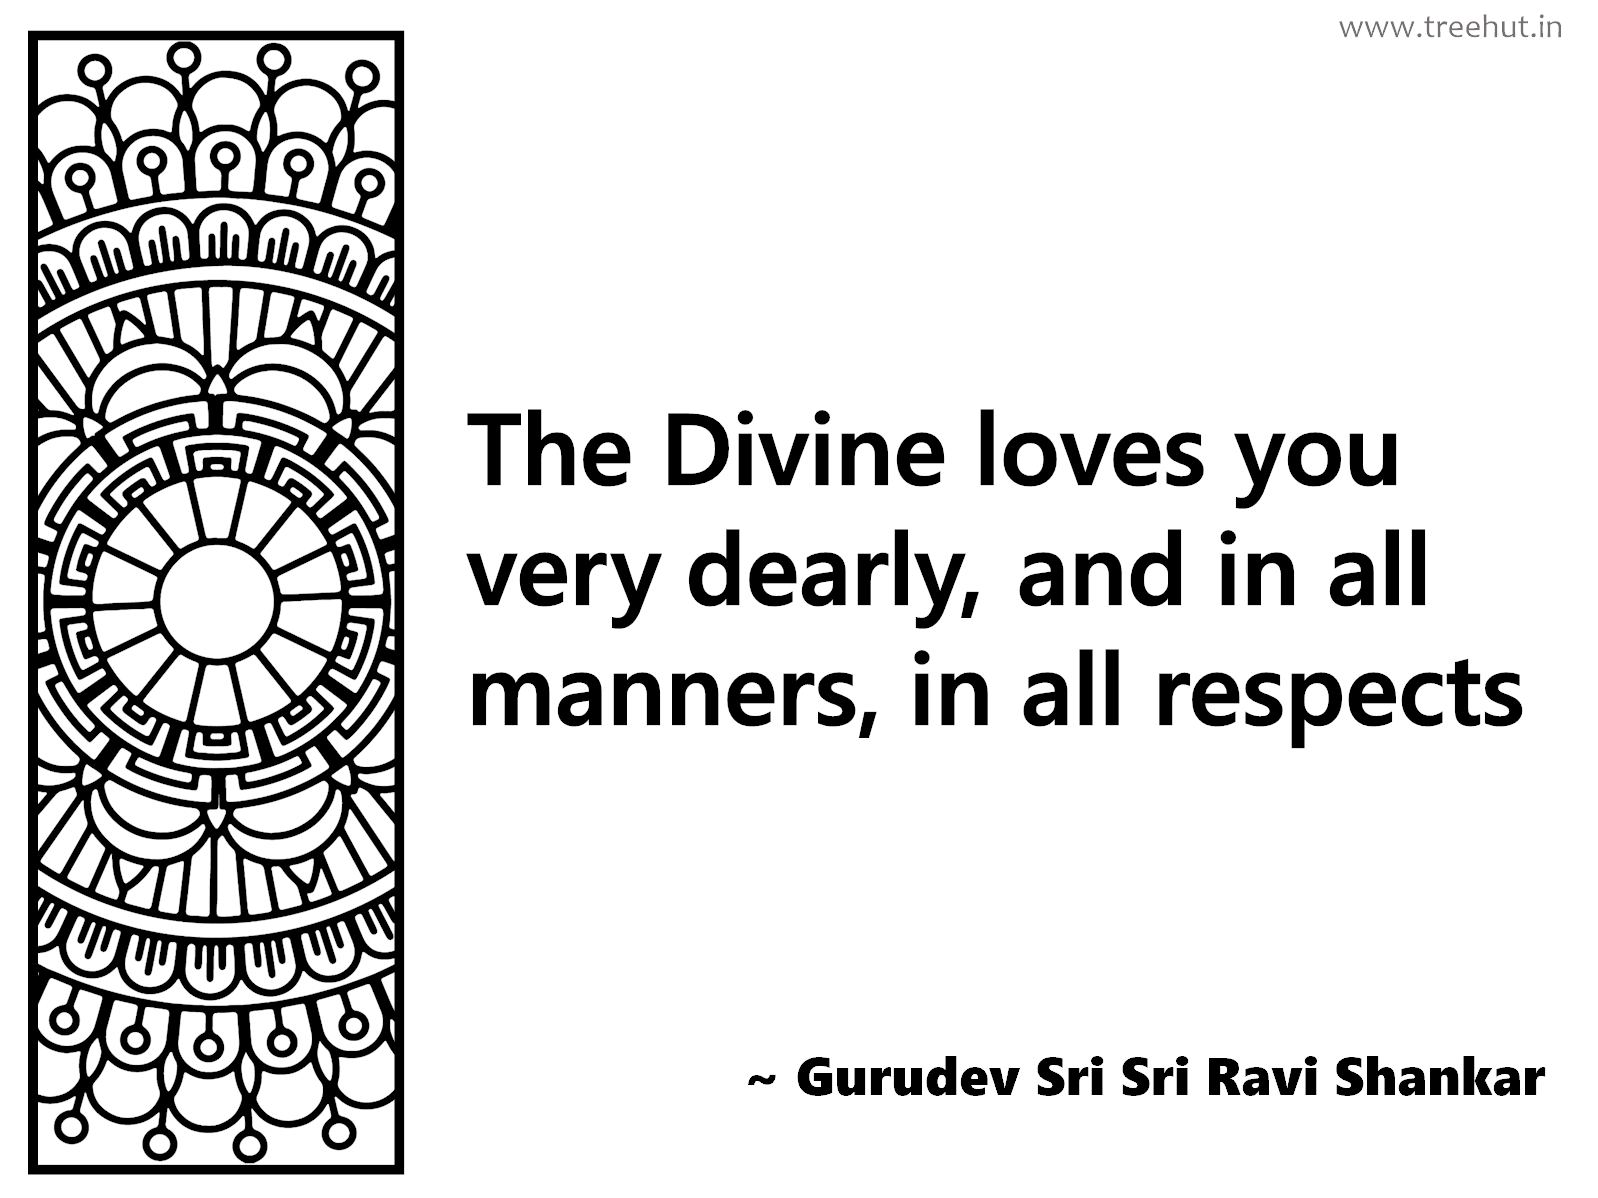 The Divine loves you very dearly, and in all manners, in all respects Inspirational Quote by Gurudev Sri Sri Ravi Shankar, coloring pages